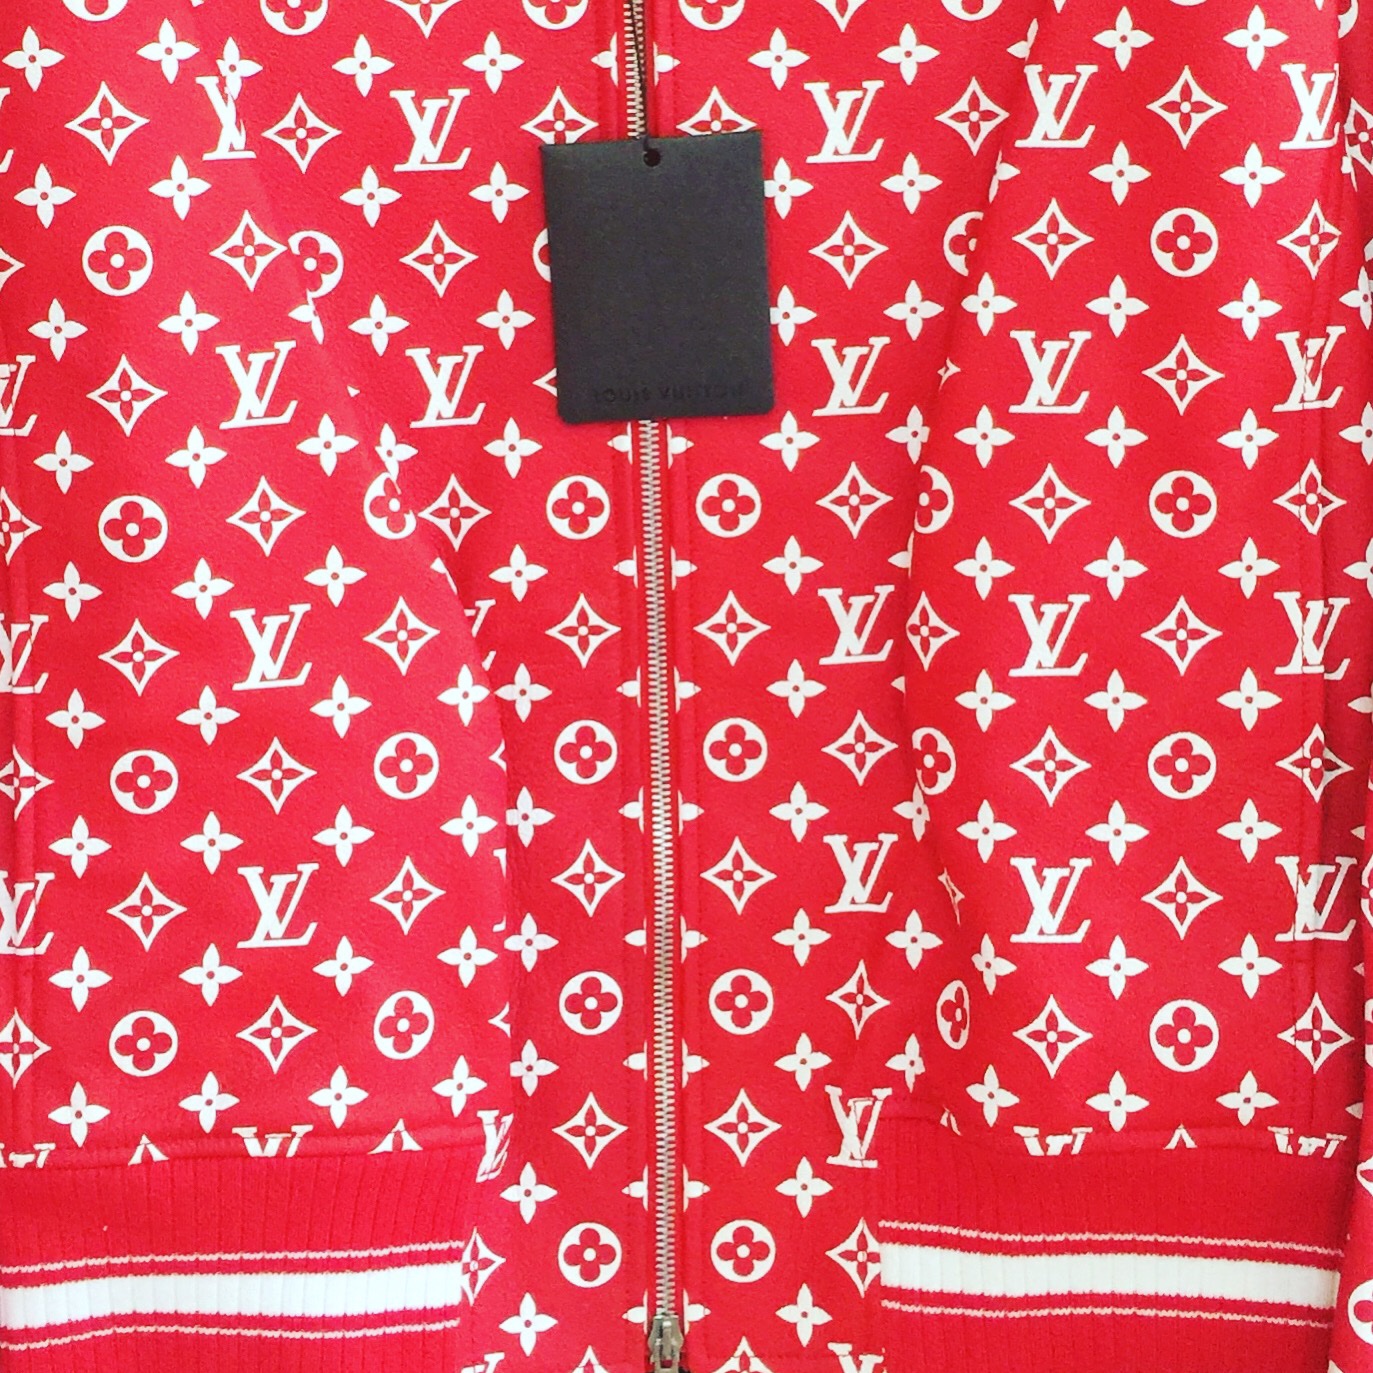 Supreme x Louis Vuitton Leather Bomber Jacket With Tags - LV